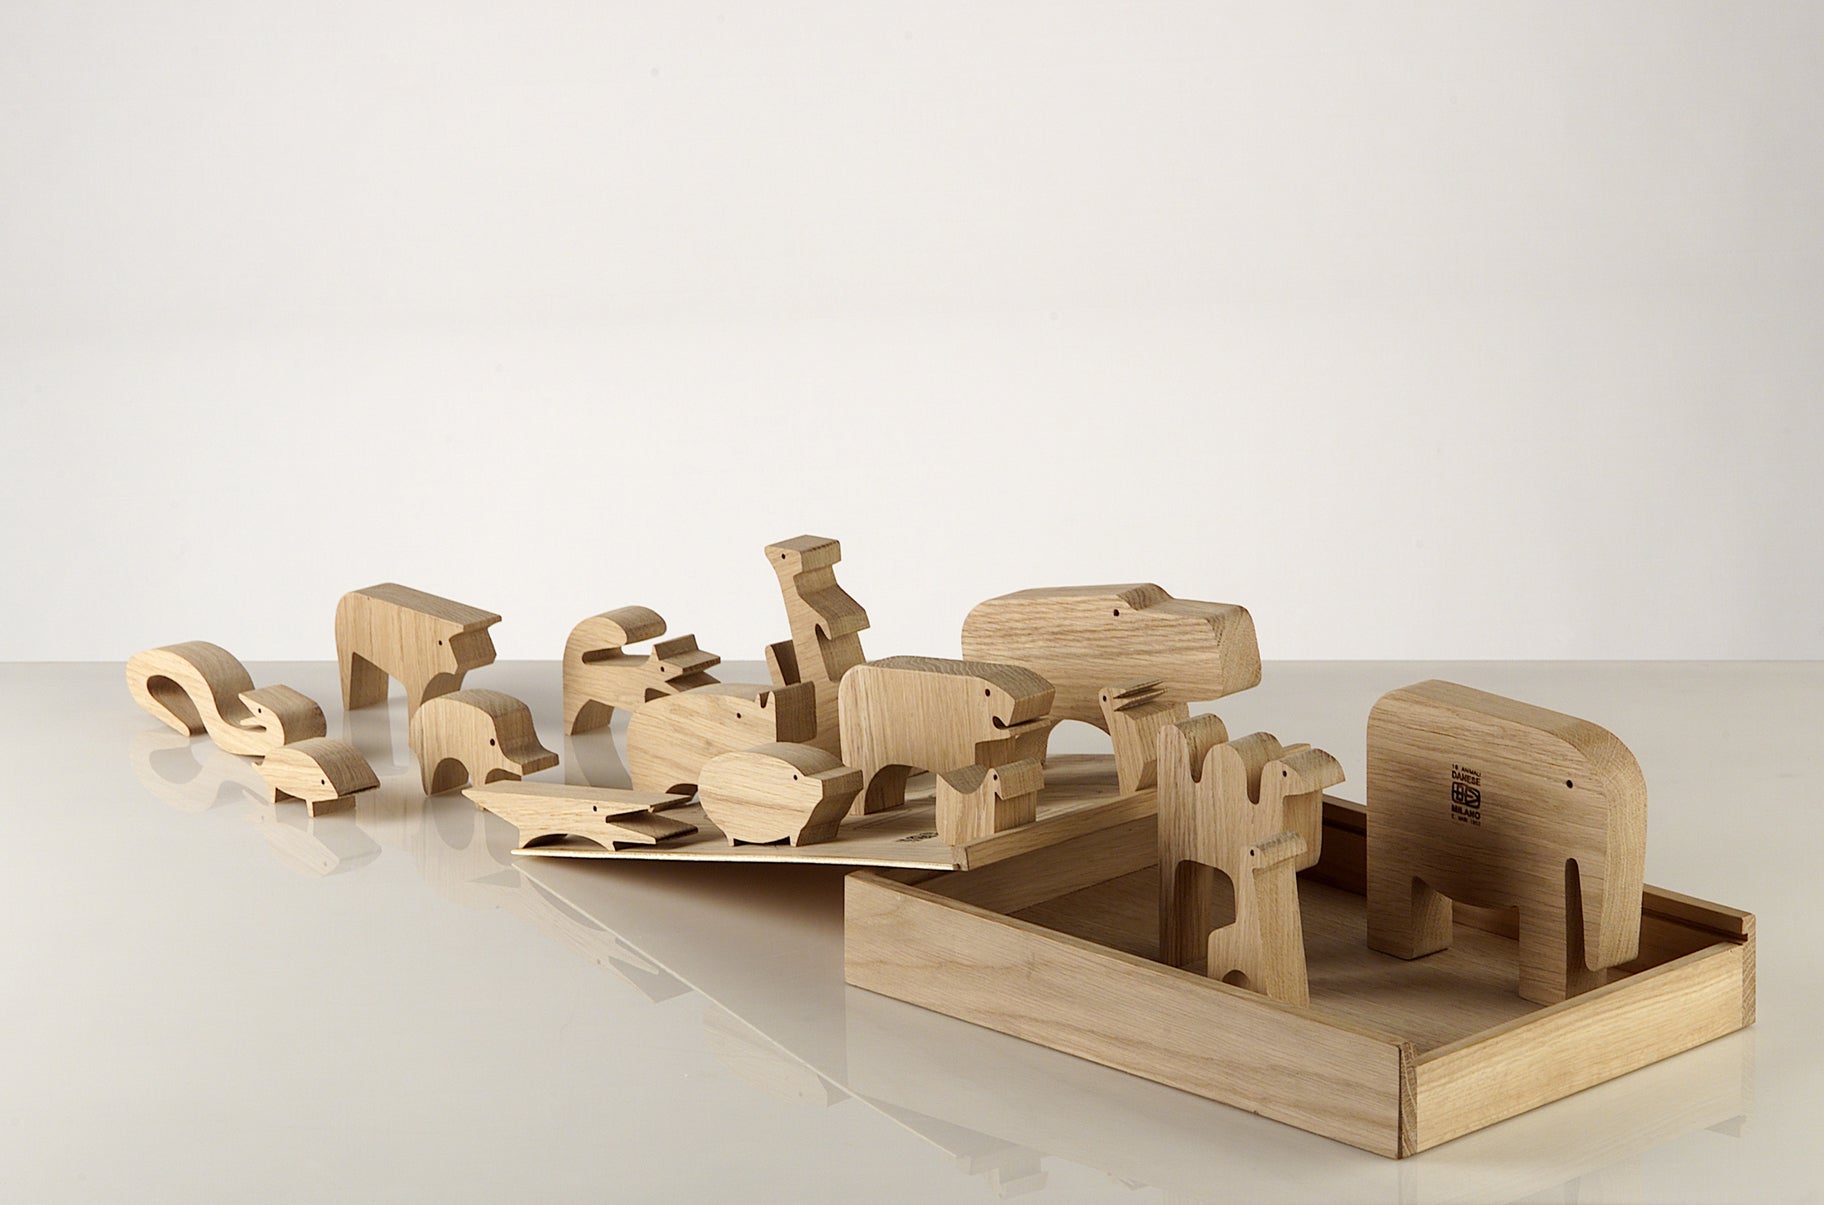 16 Animals , a wooden puzzle, was created by Mari in 1957